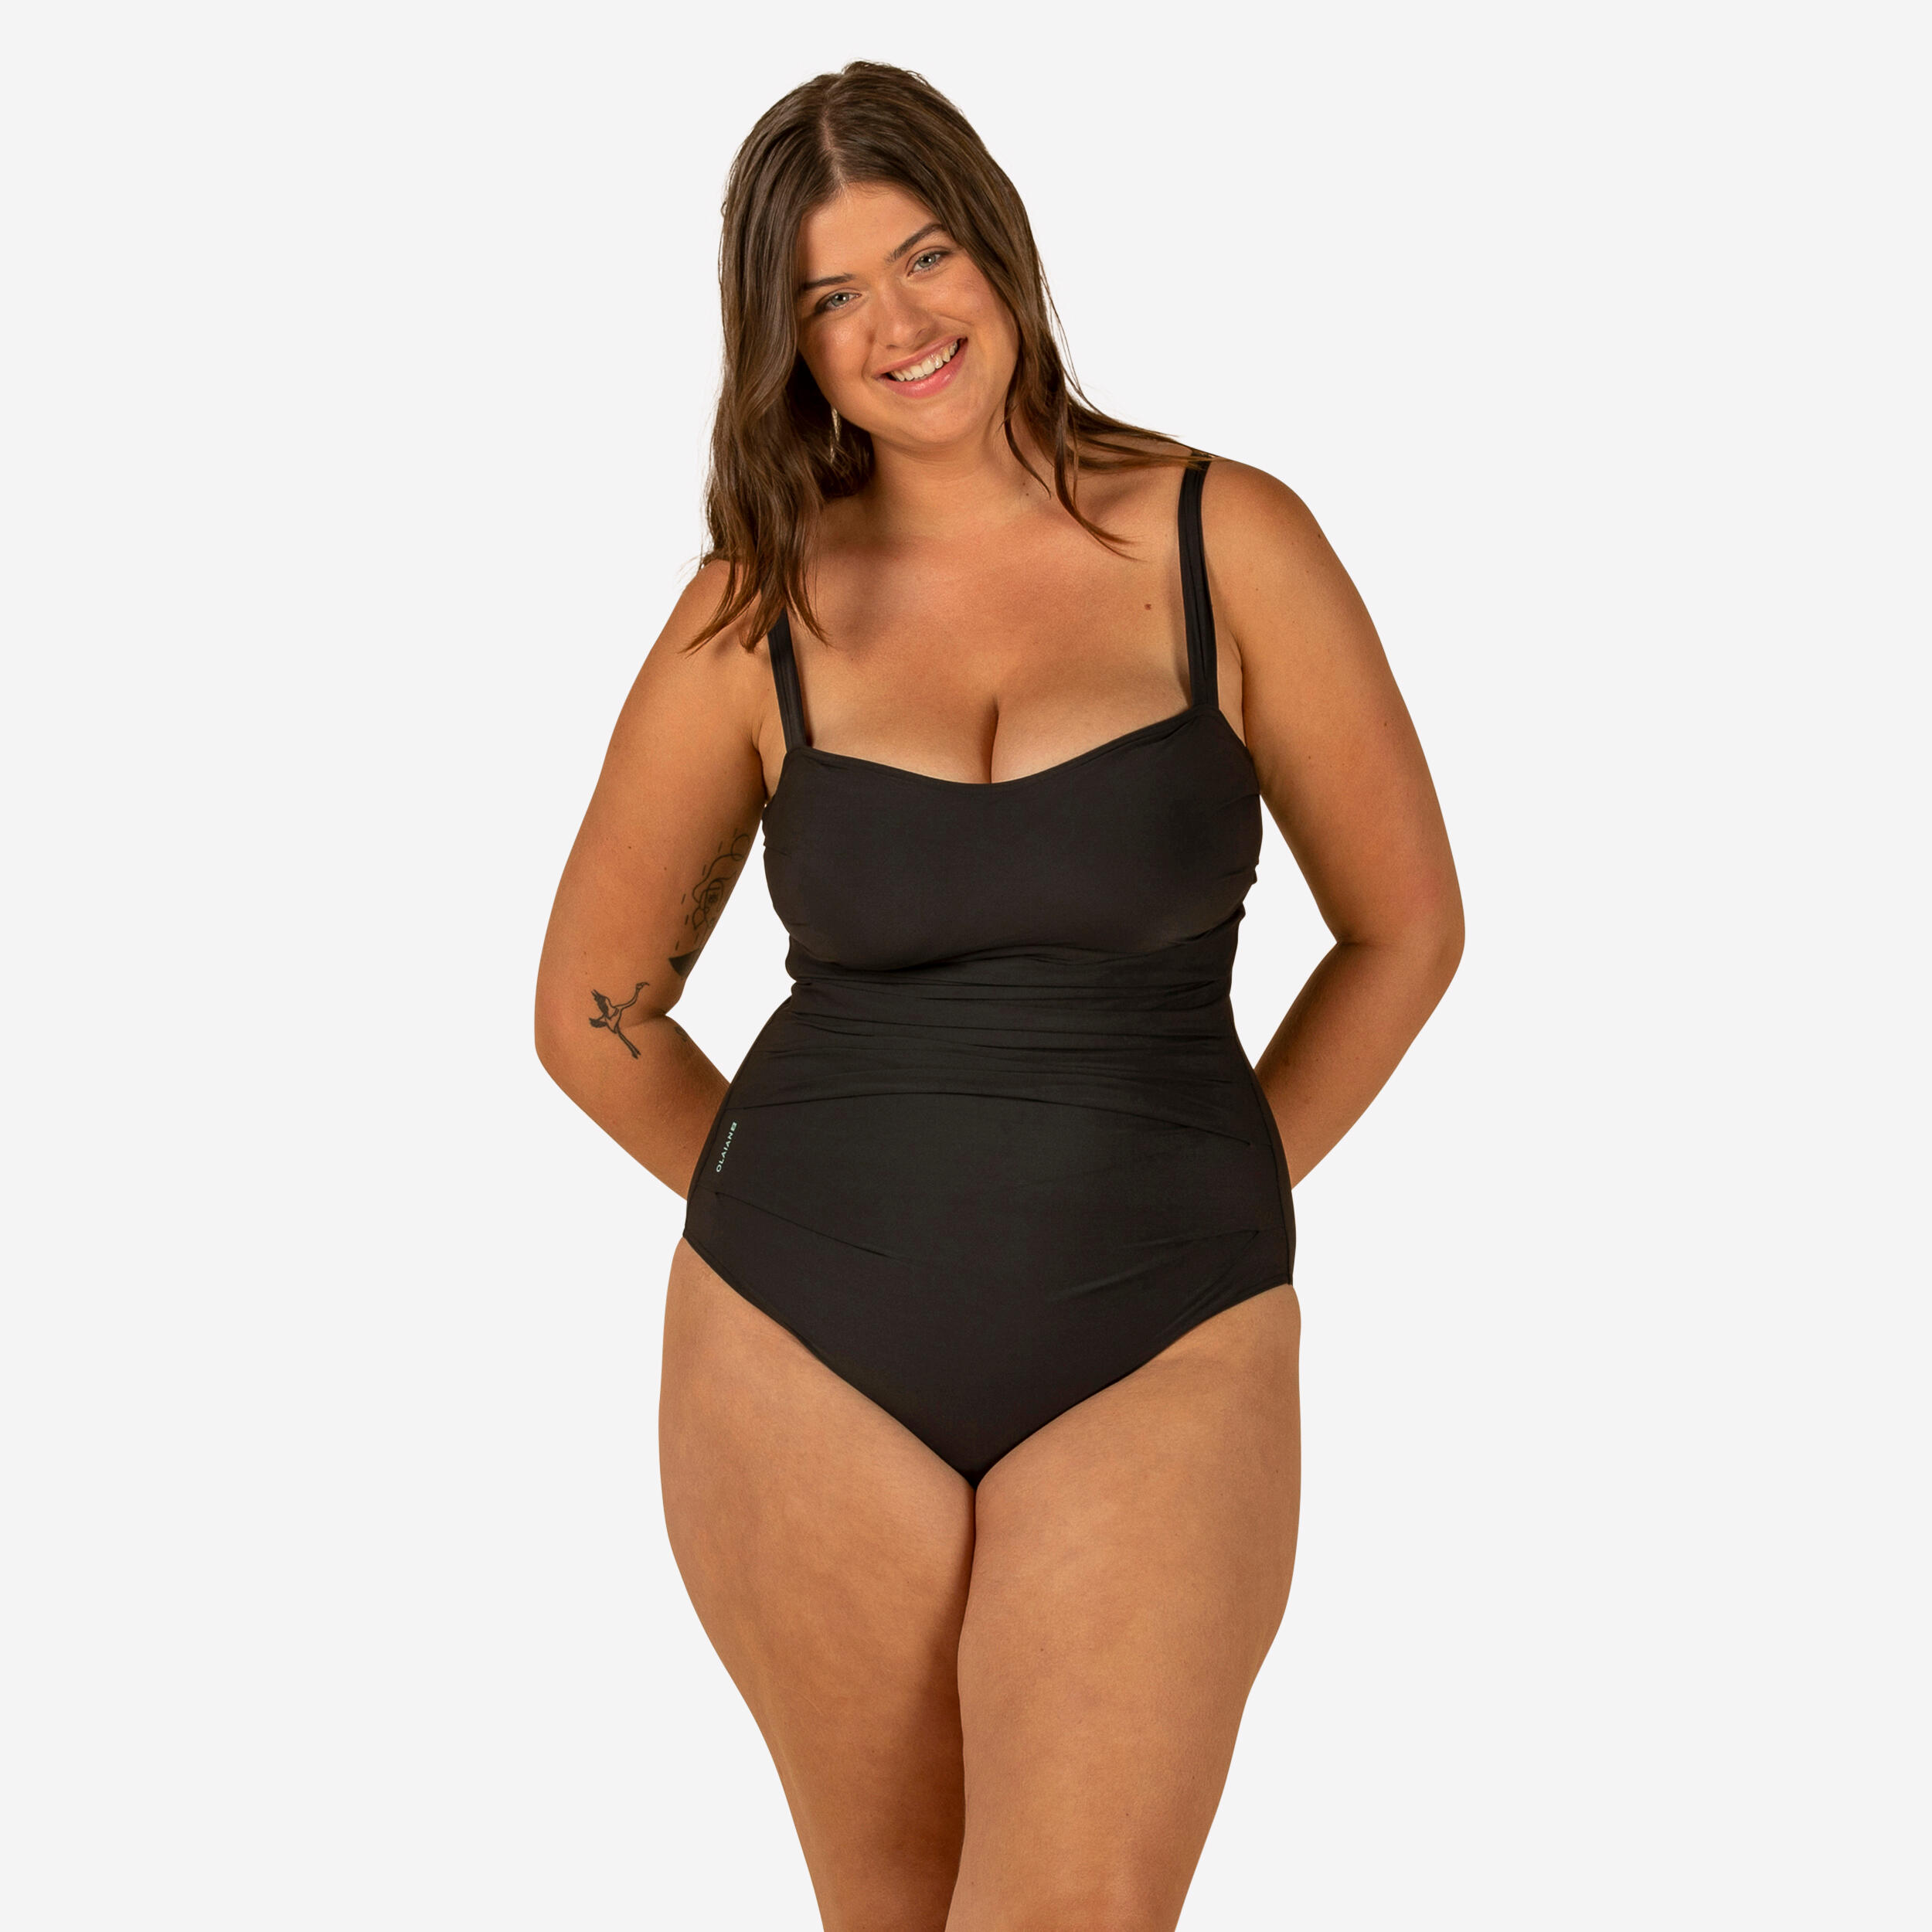 Dora Women's One-Piece Body-Sculpting Swimsuit with Flat Stomach Effect - Black 1/5